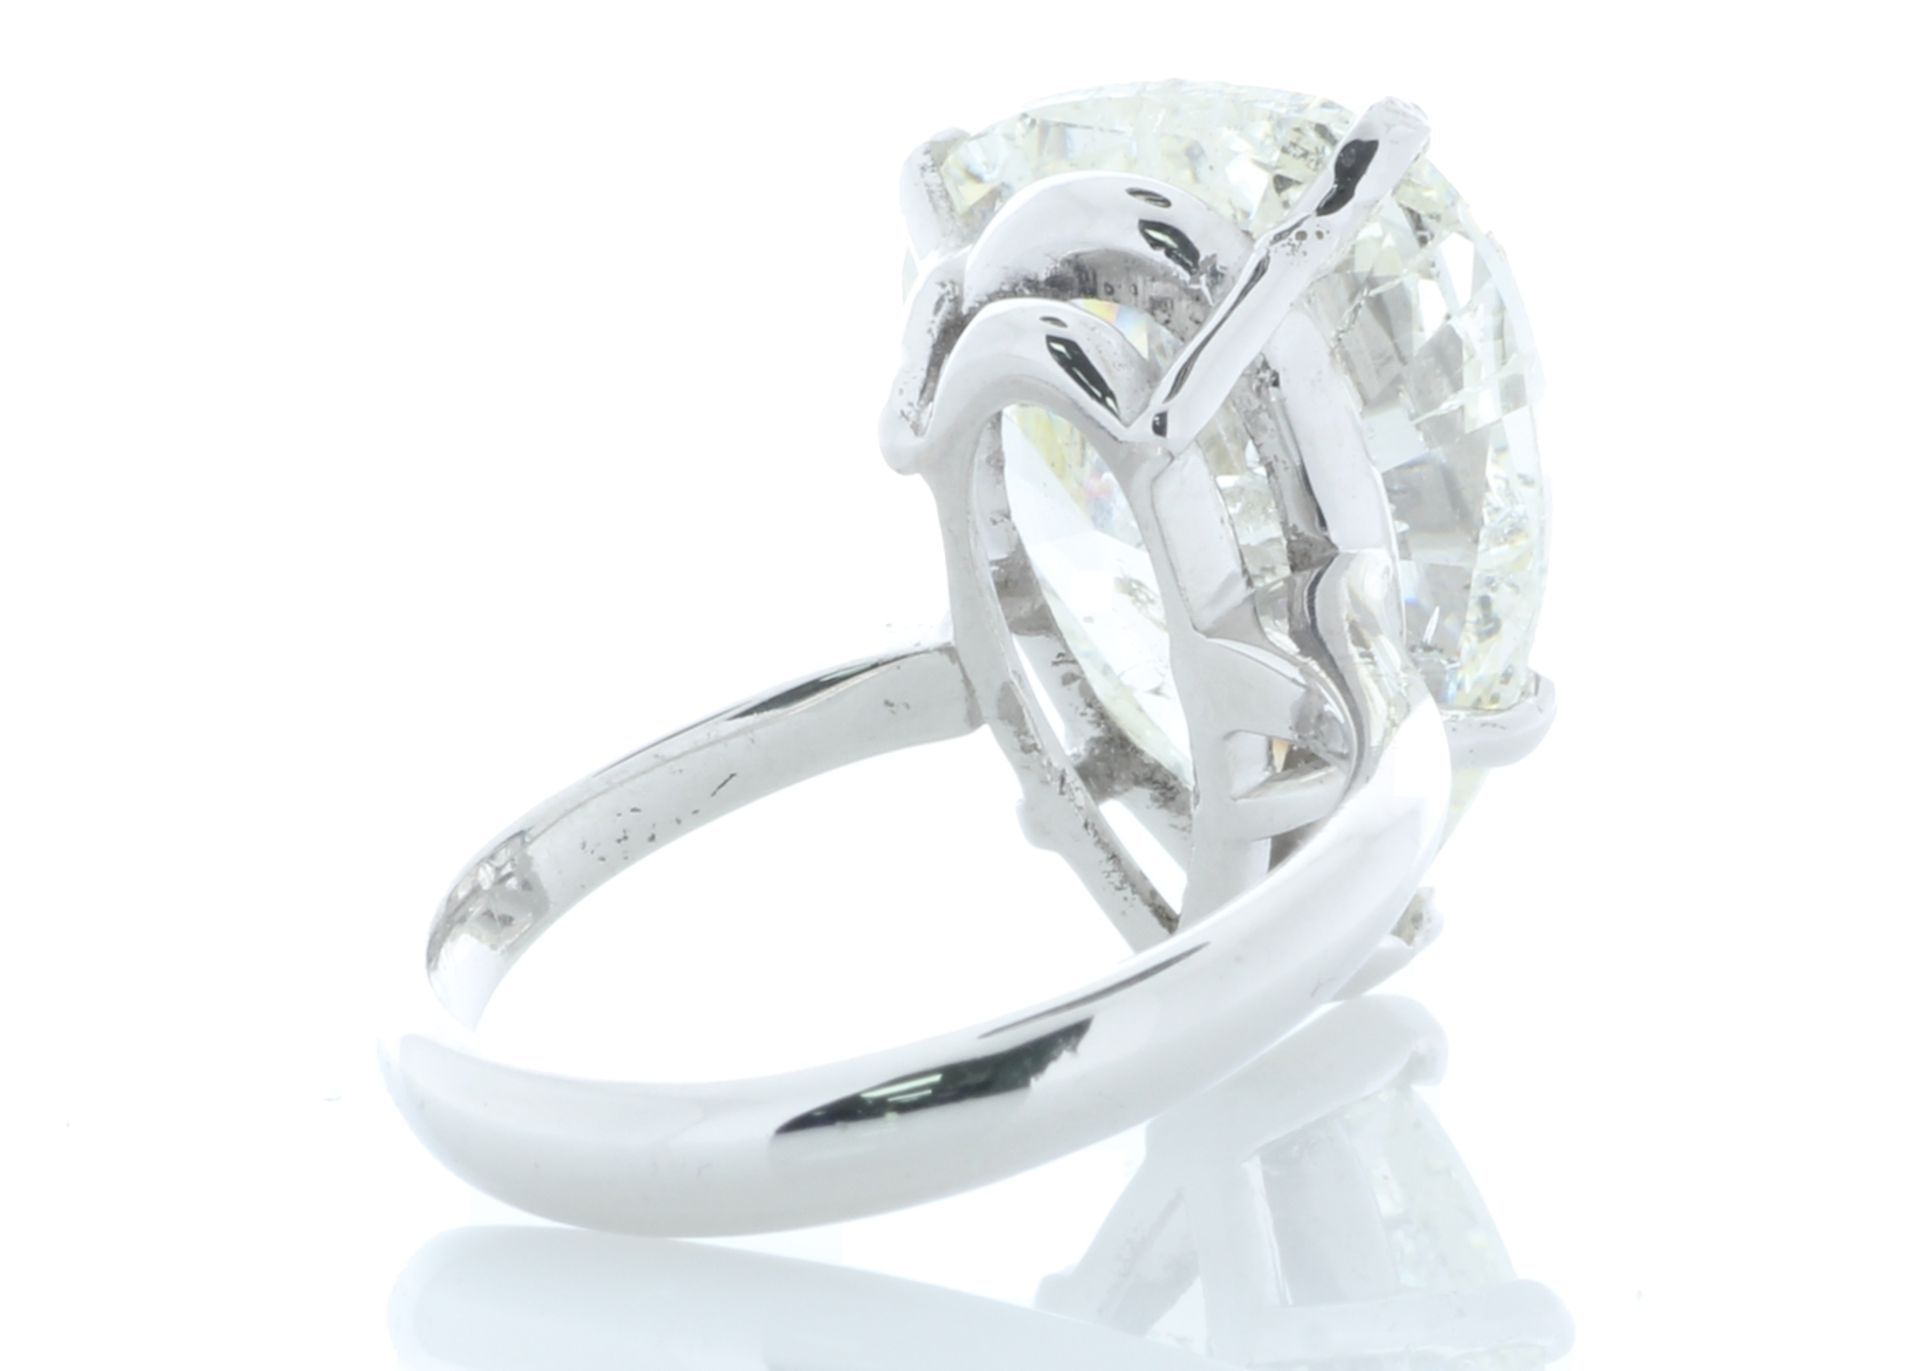 18ct White Gold Pear Shaped Diamond Ring 10.06 Carats - Valued by IDI £175,000.00 - 18ct White - Image 5 of 6